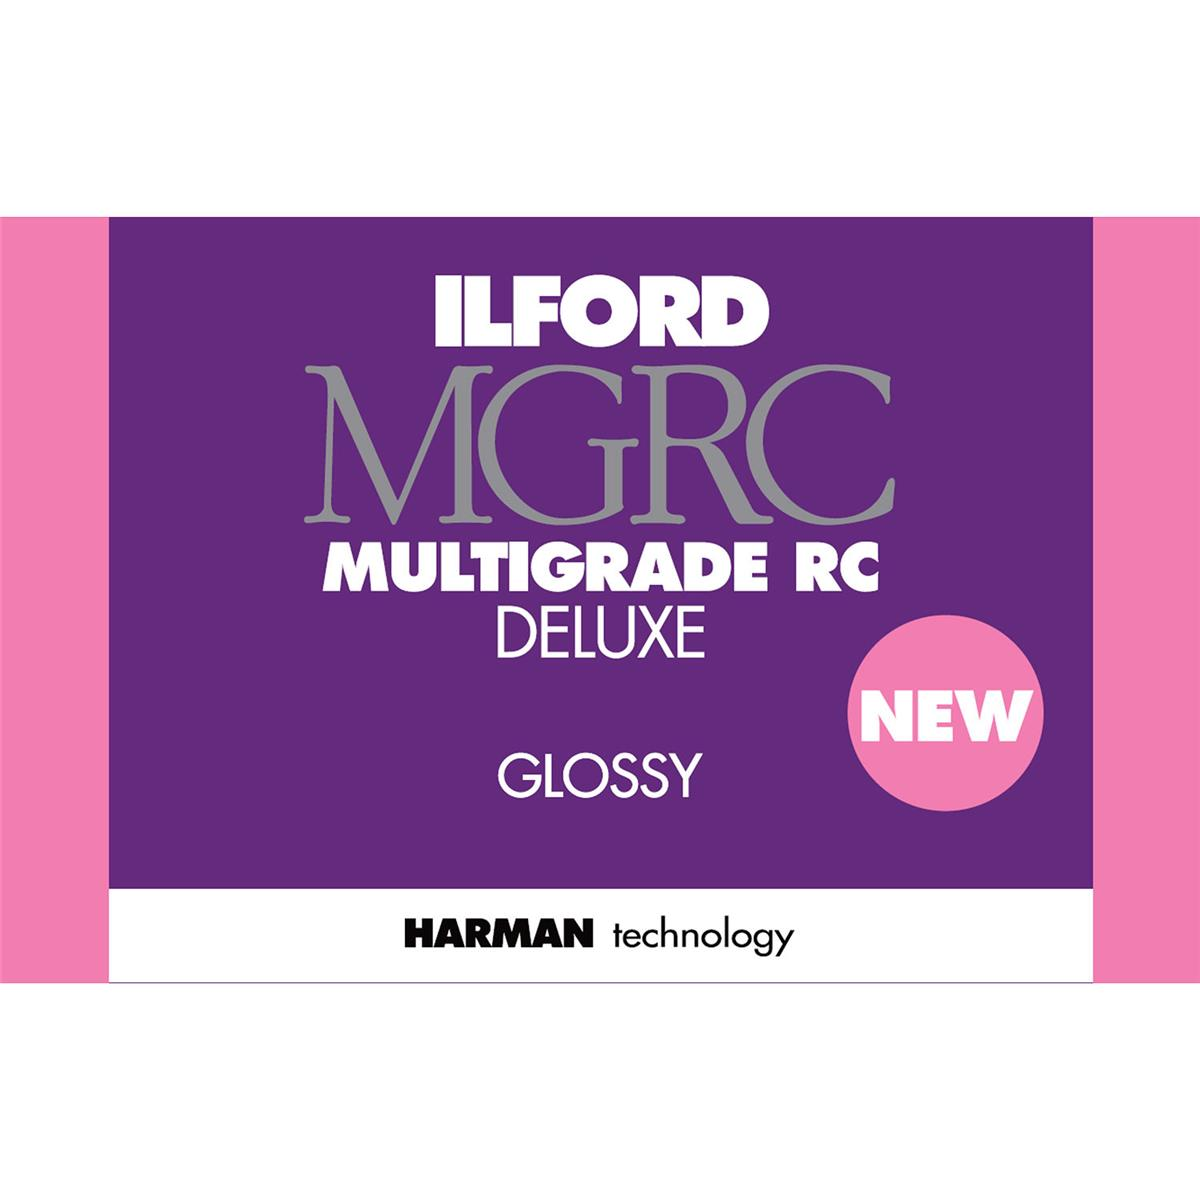 Ilford 1179484 Multigrade V RC Deluxe Paper (Glossy, 8 x 10", 25 Sheets)